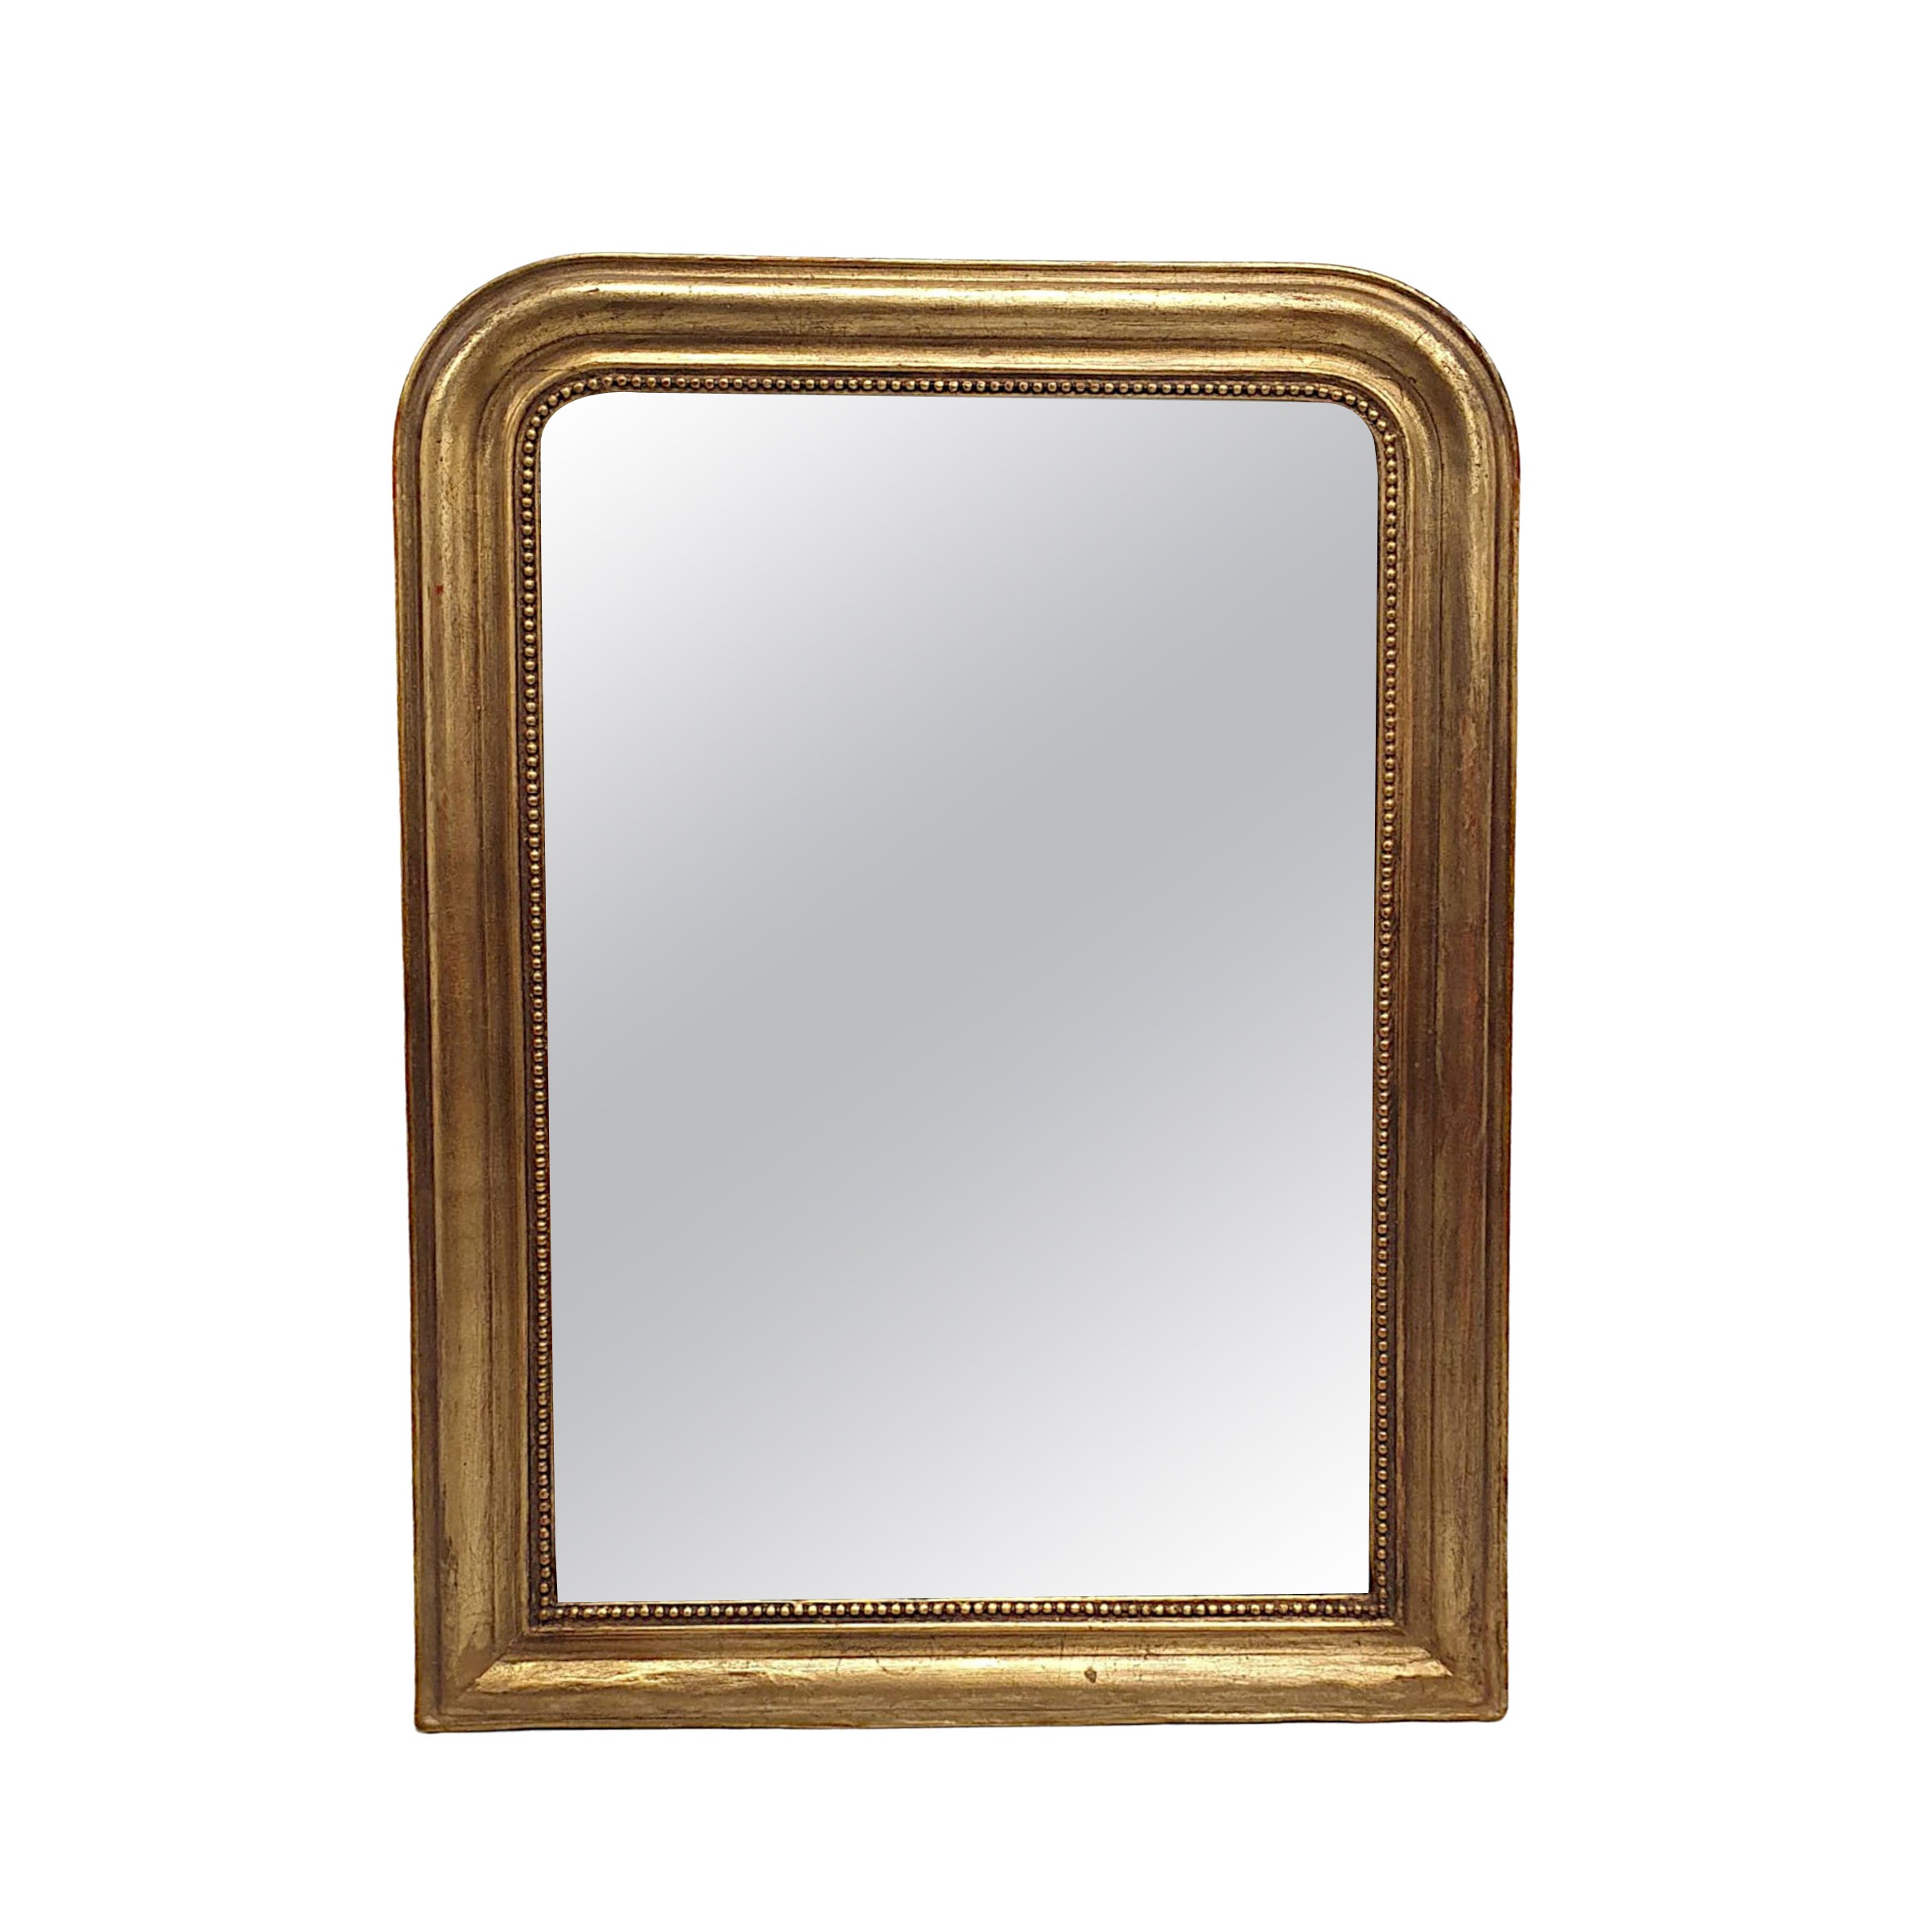 Lovely 19th Century Giltwood Hall or Bathroom Mirror For Sale